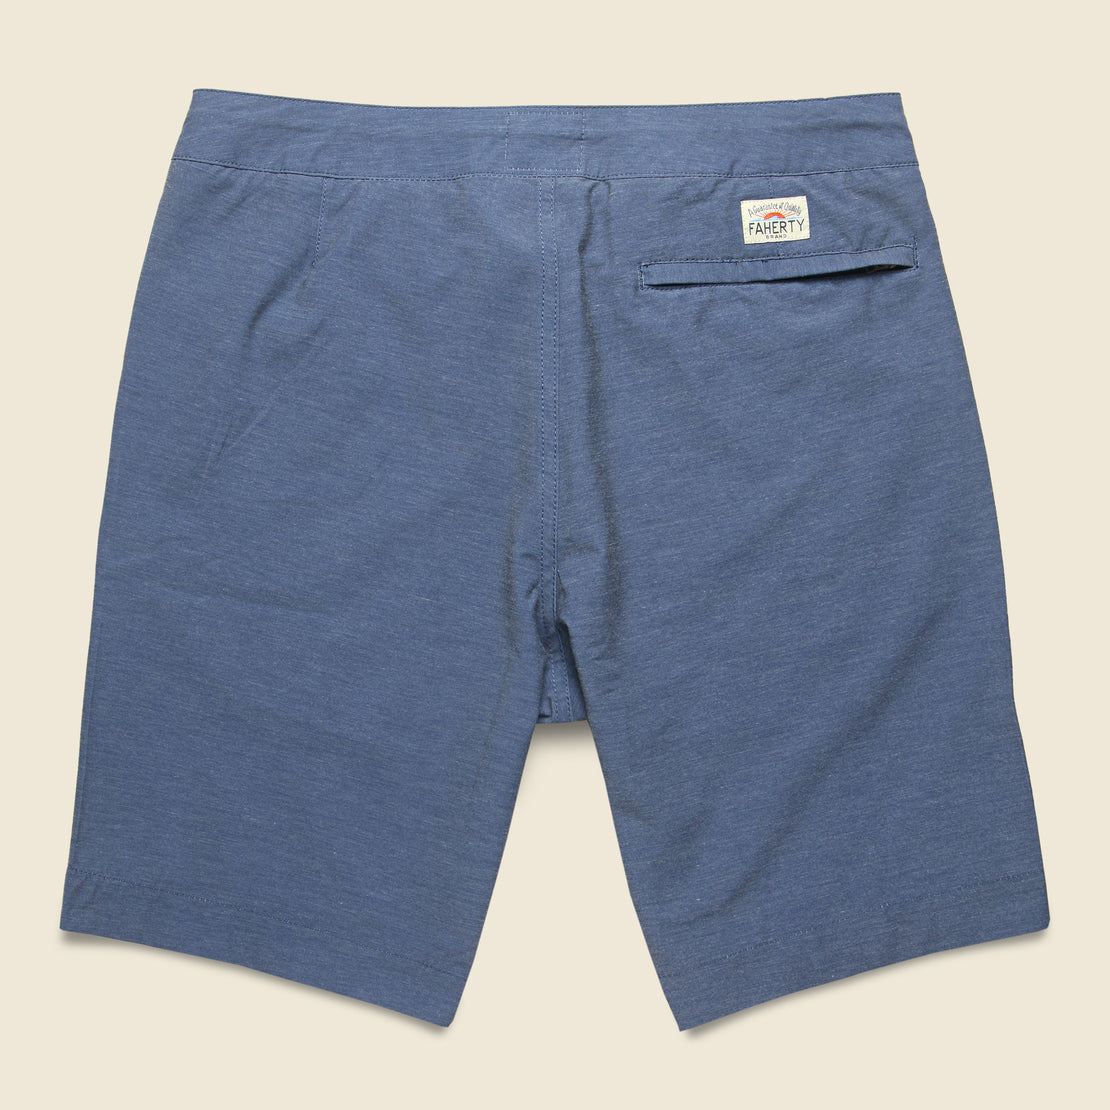 All Day Short - Navy - Faherty - STAG Provisions - Shorts - Solid